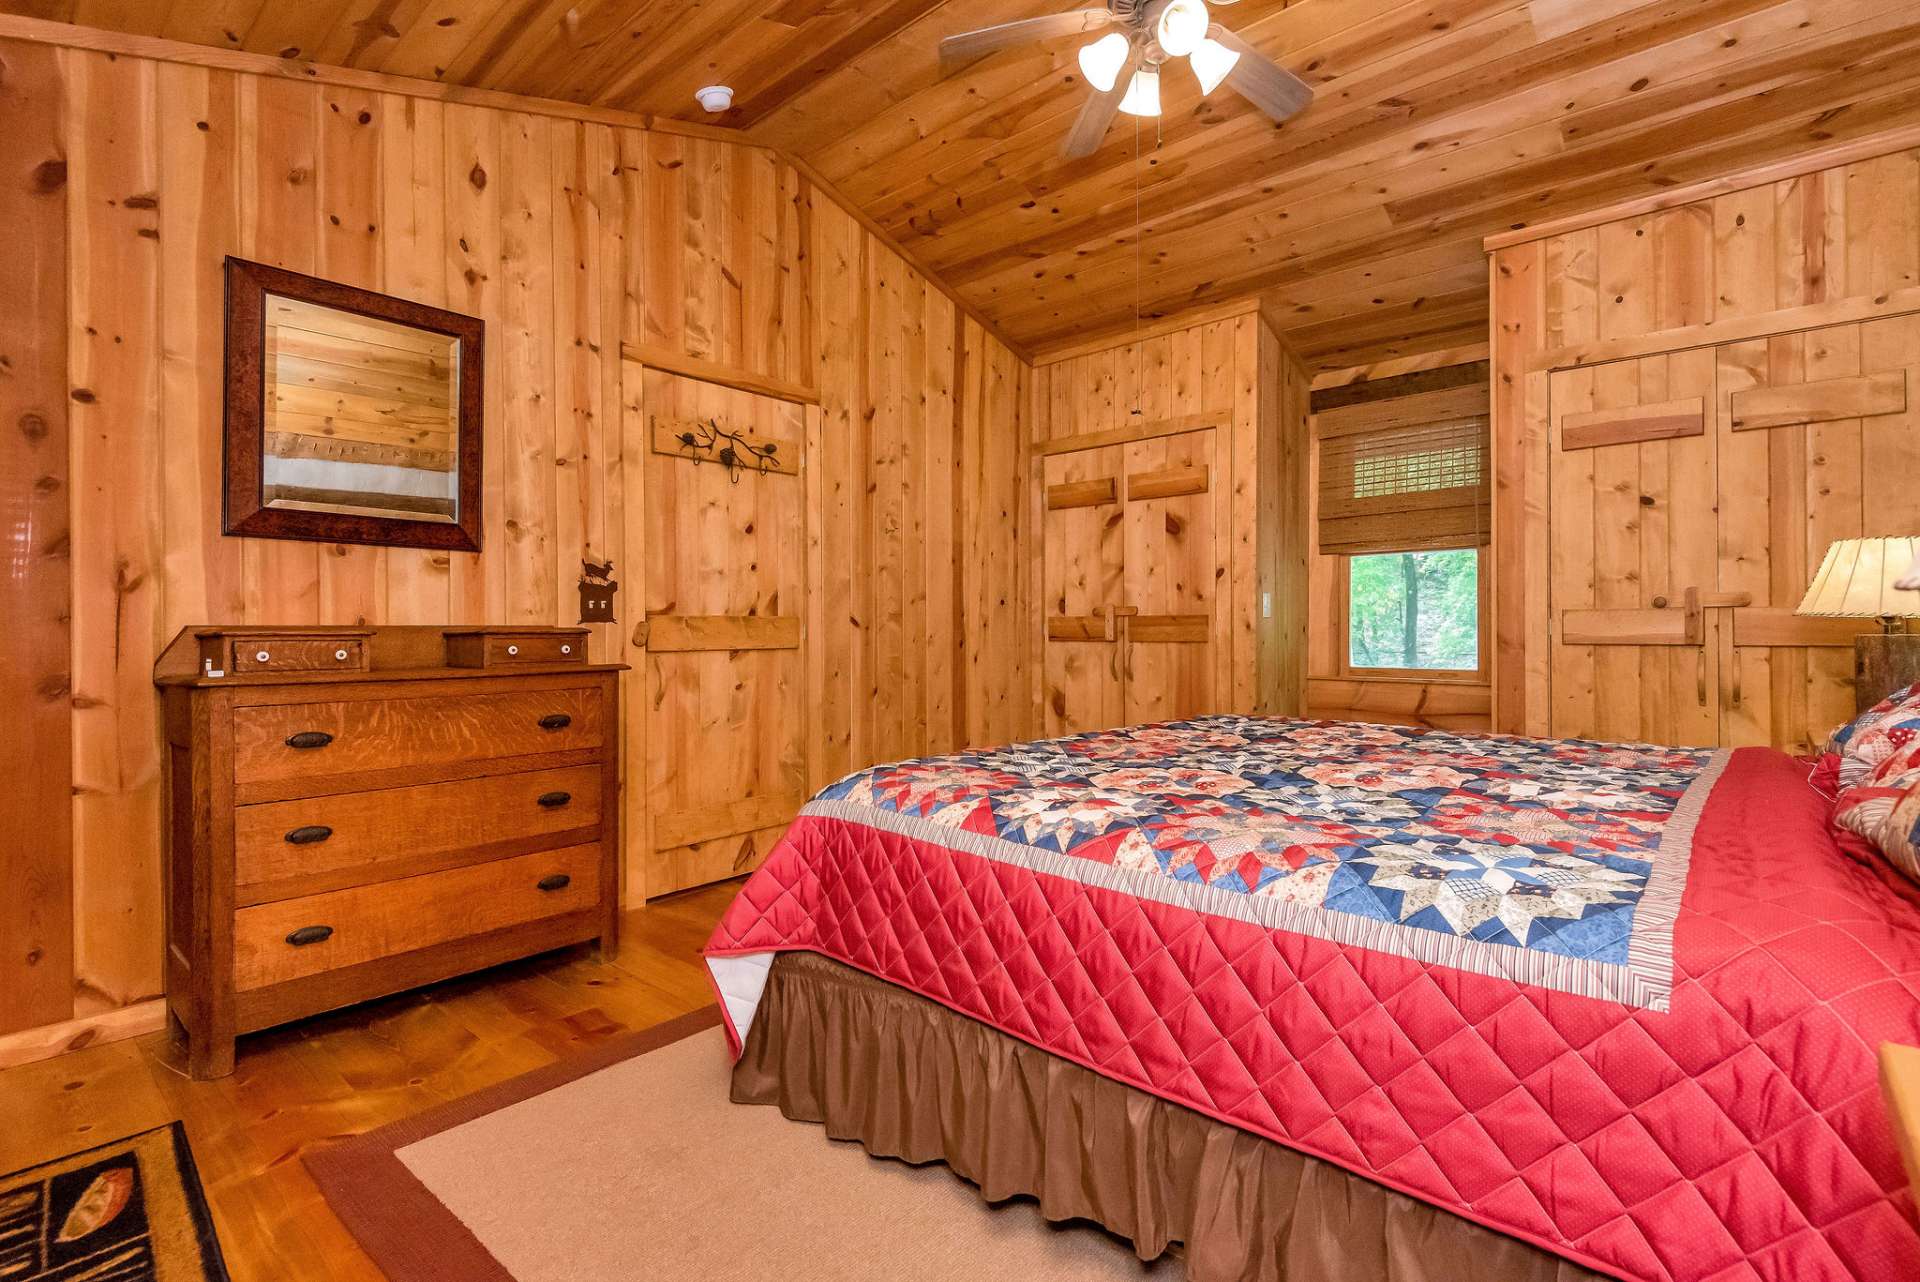 This room creates a space to get rejuvenated for the next day of adventures in the Blue Ridge Mountains.